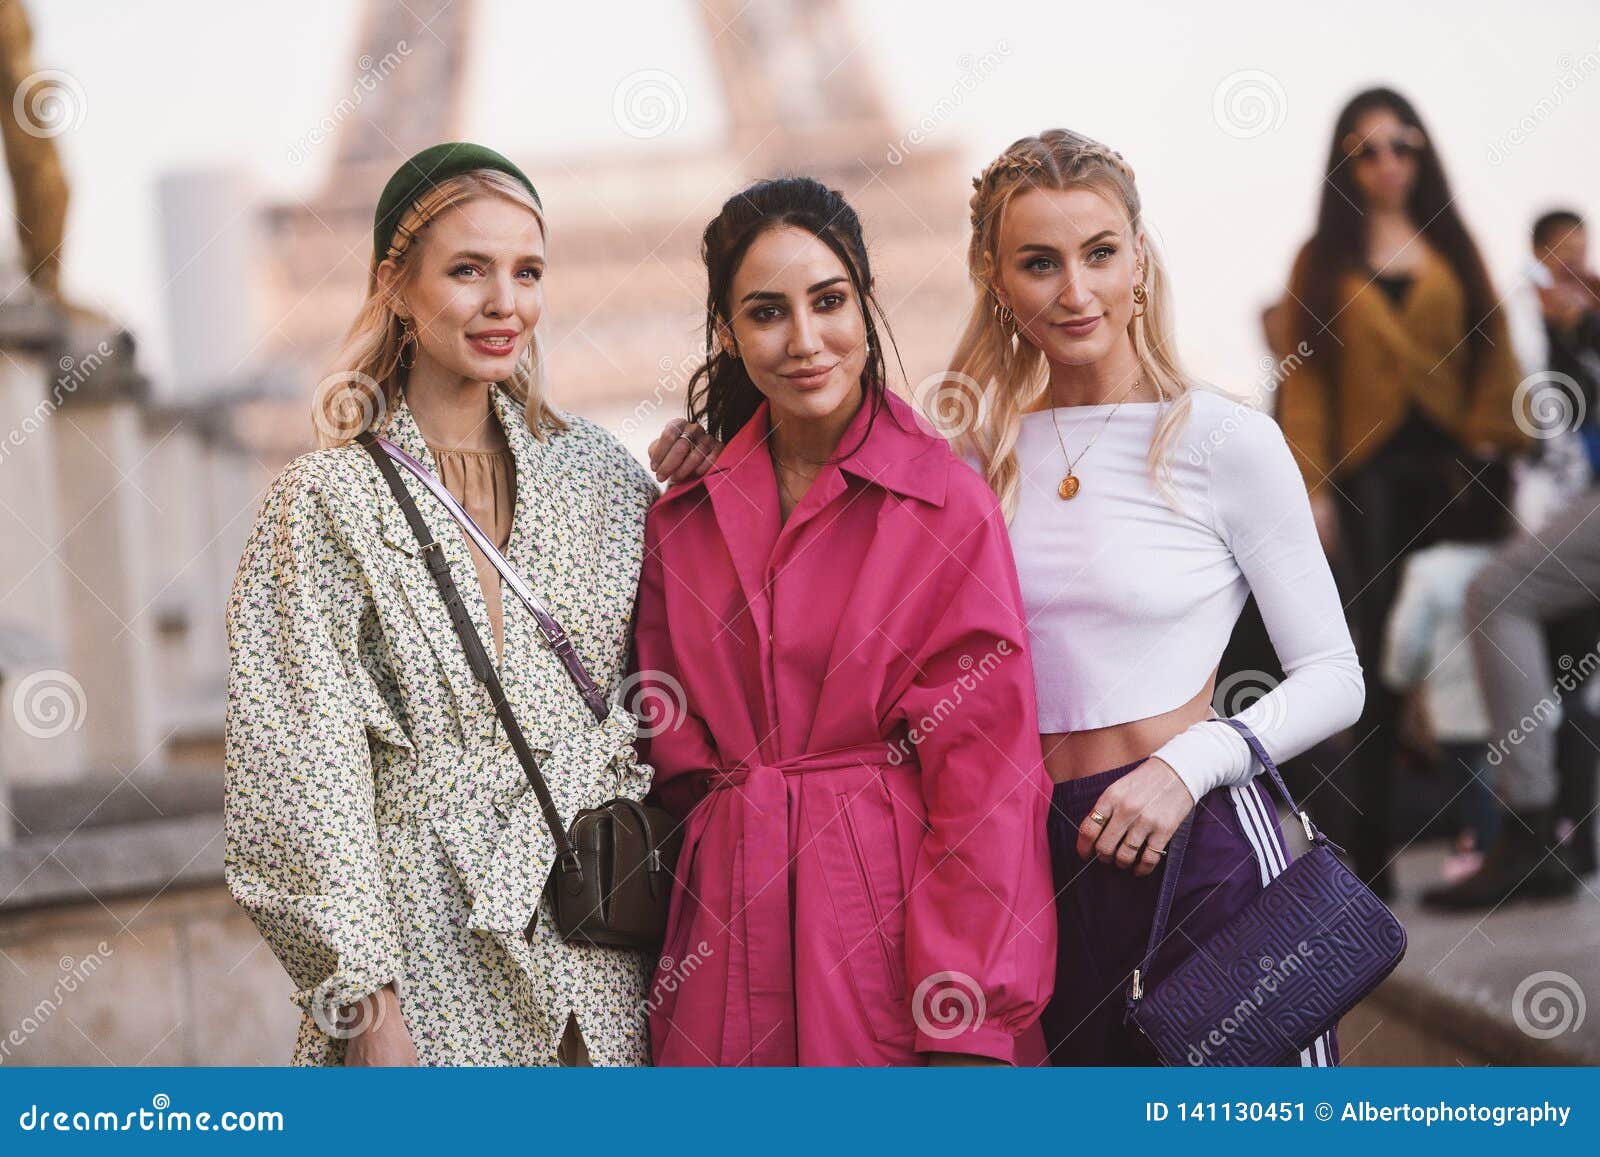 Paris, France - February 27, 2019: Street Style Outfit - Women